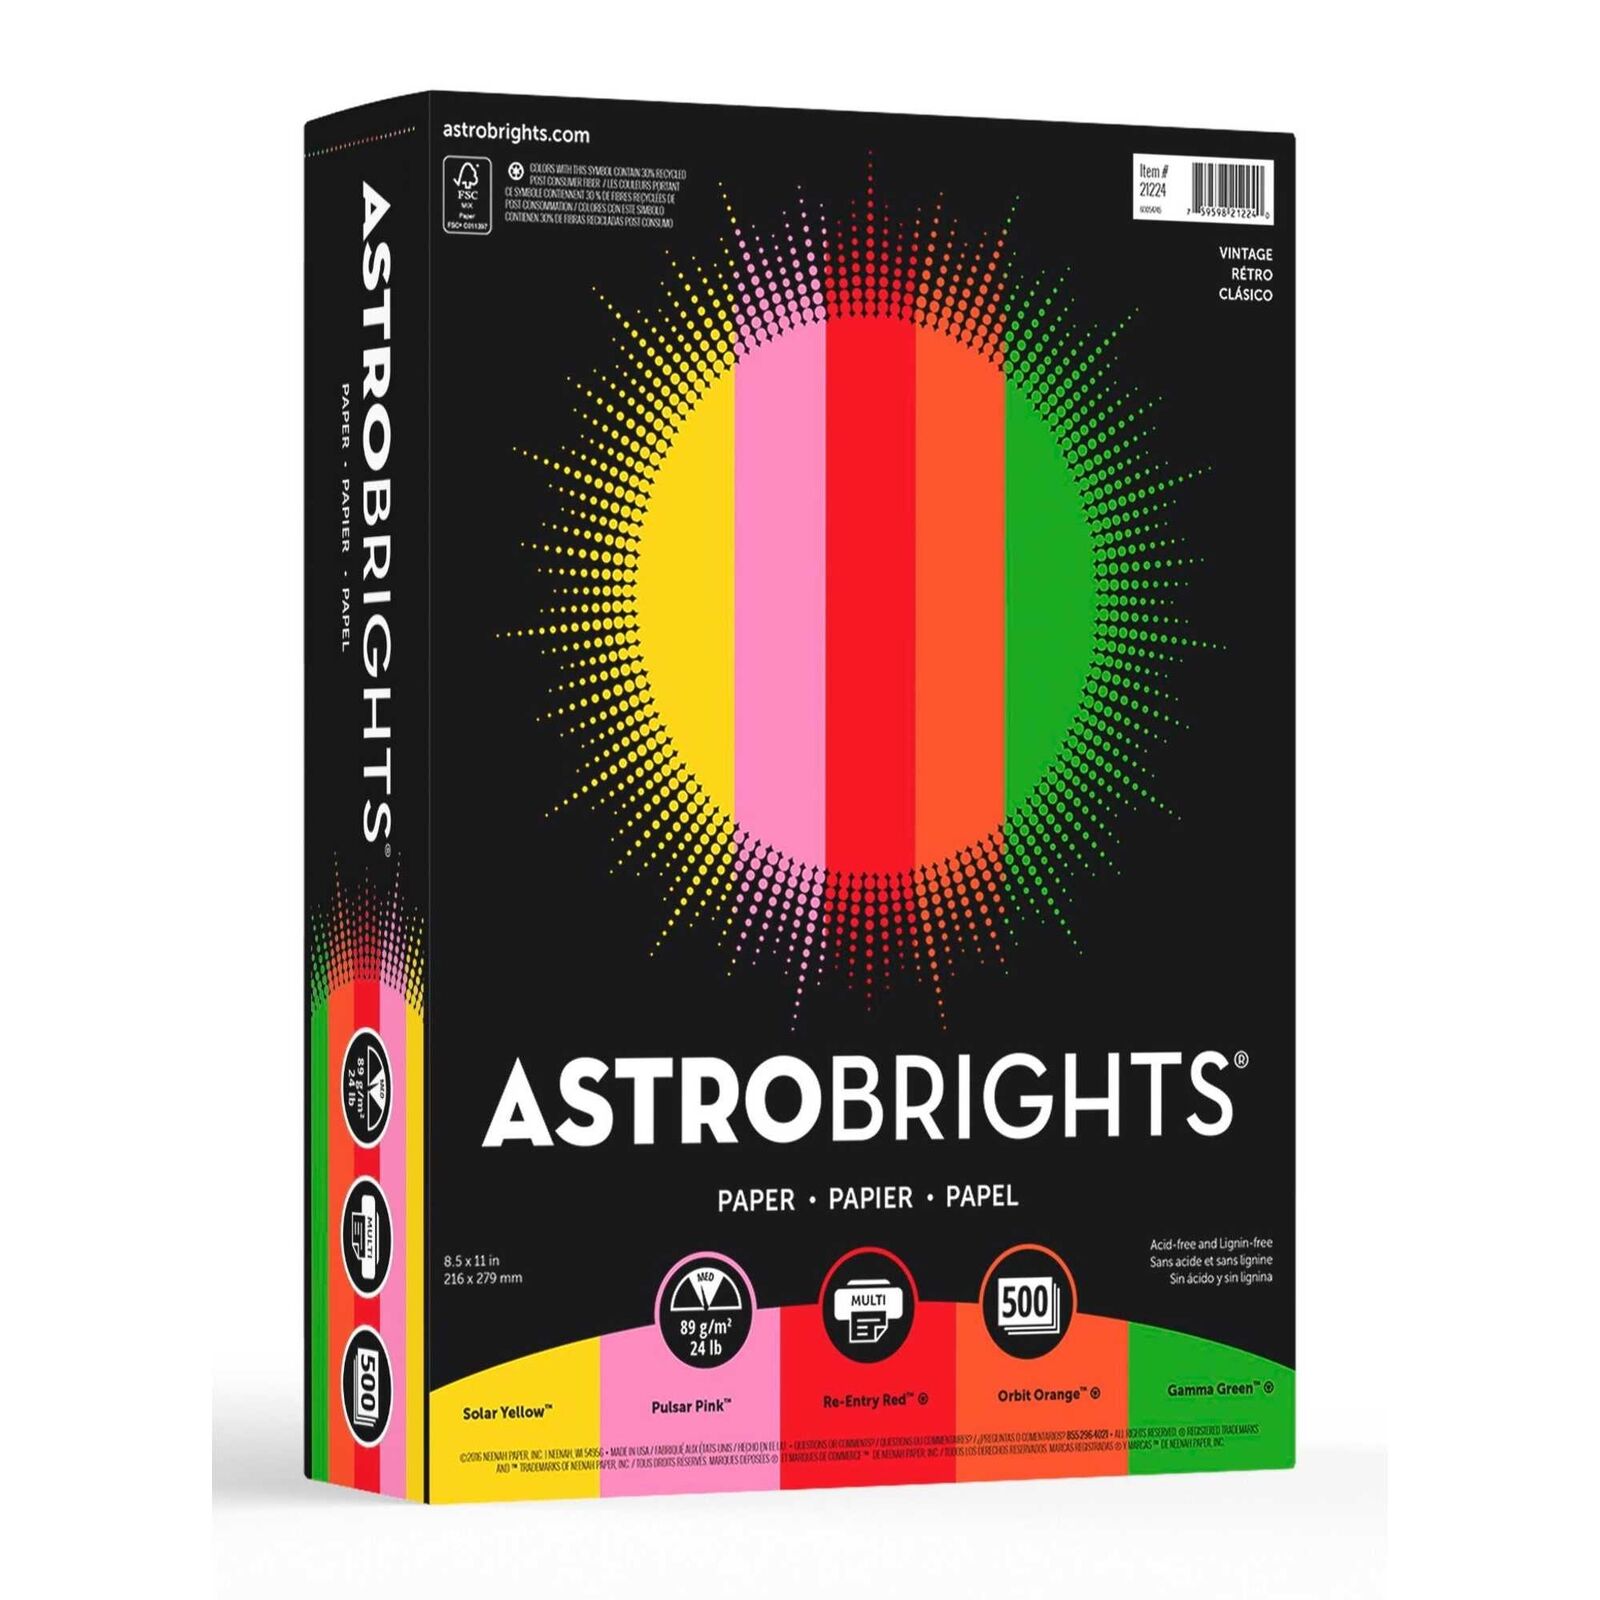 Astrobrights Colored Paper, 8-1/2 x 11 Inches, Assorted Vintage Colors, Pack of 